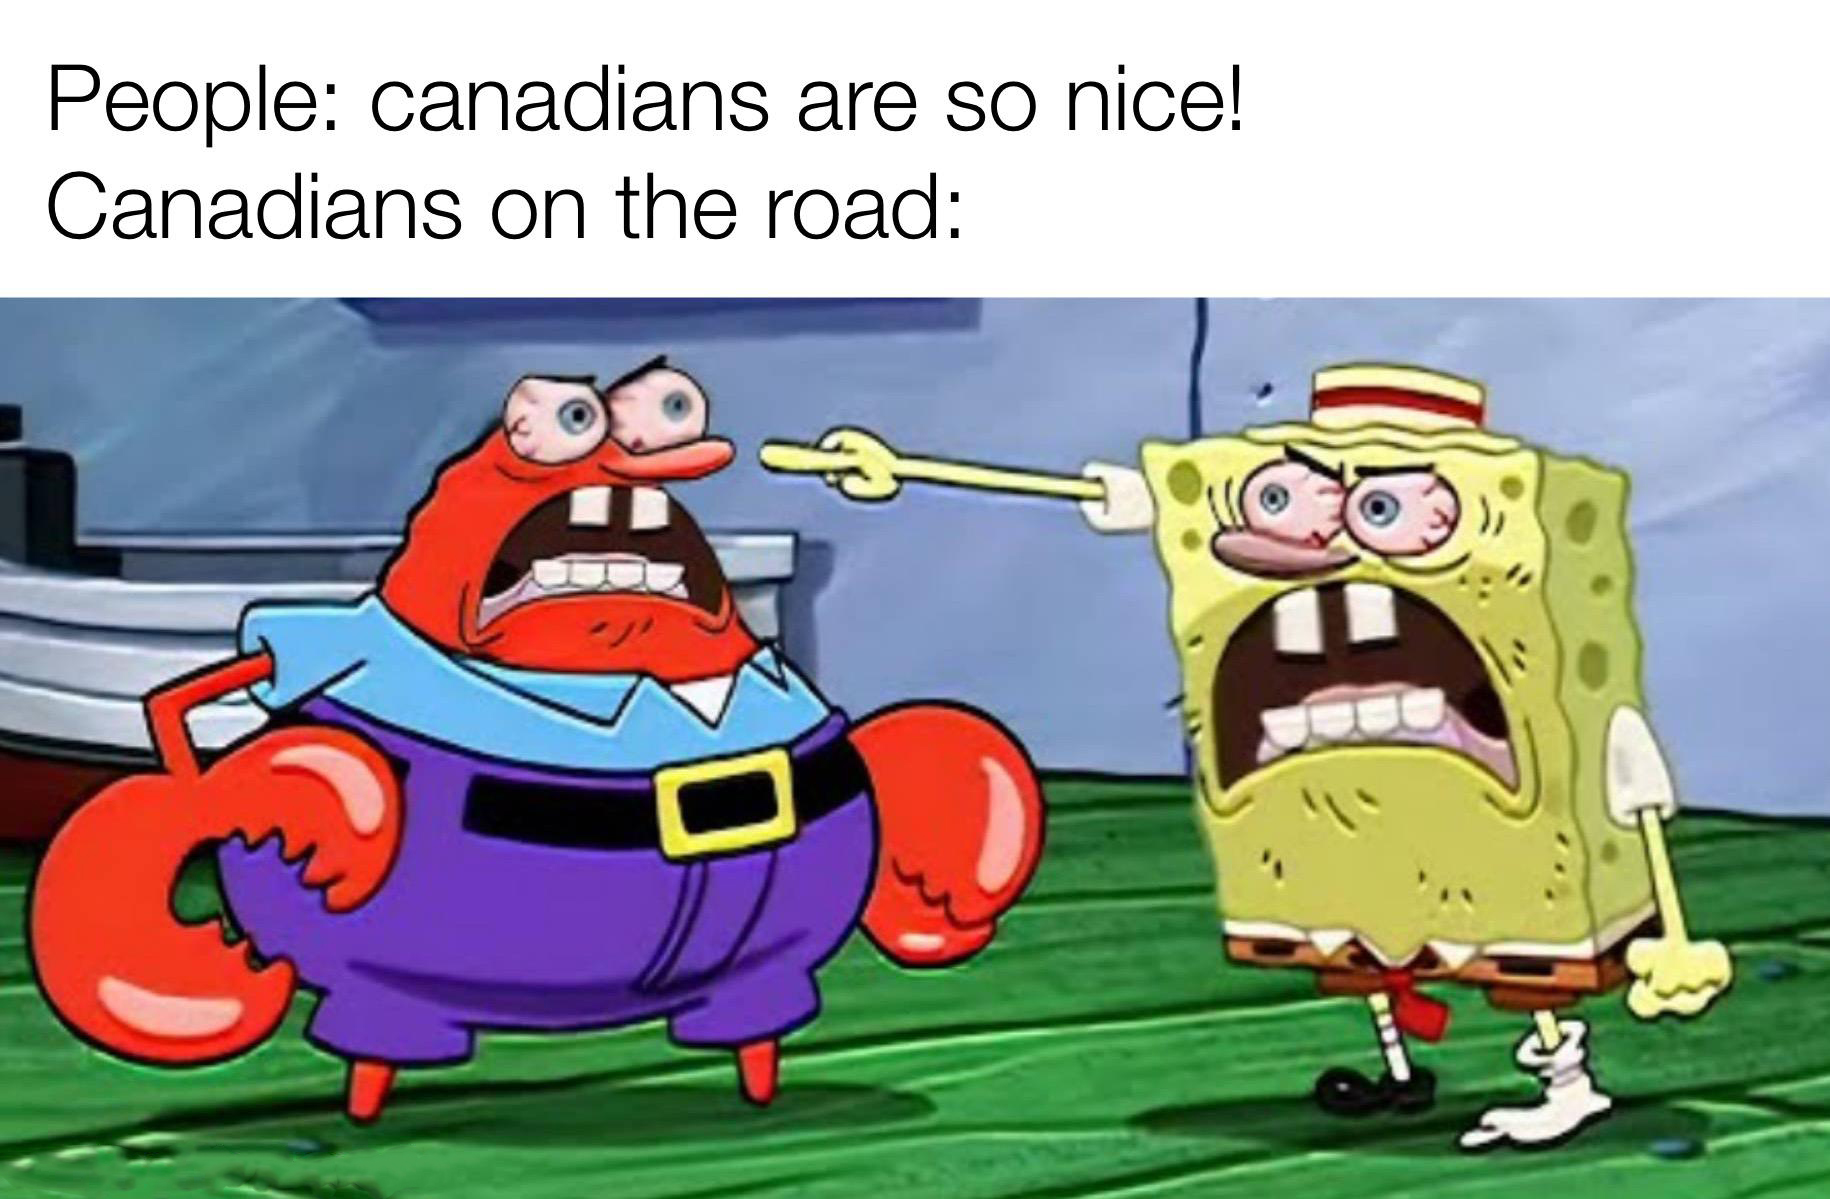 monday morning randomness - cartoon - People canadians are so nice! Canadians on the road 681